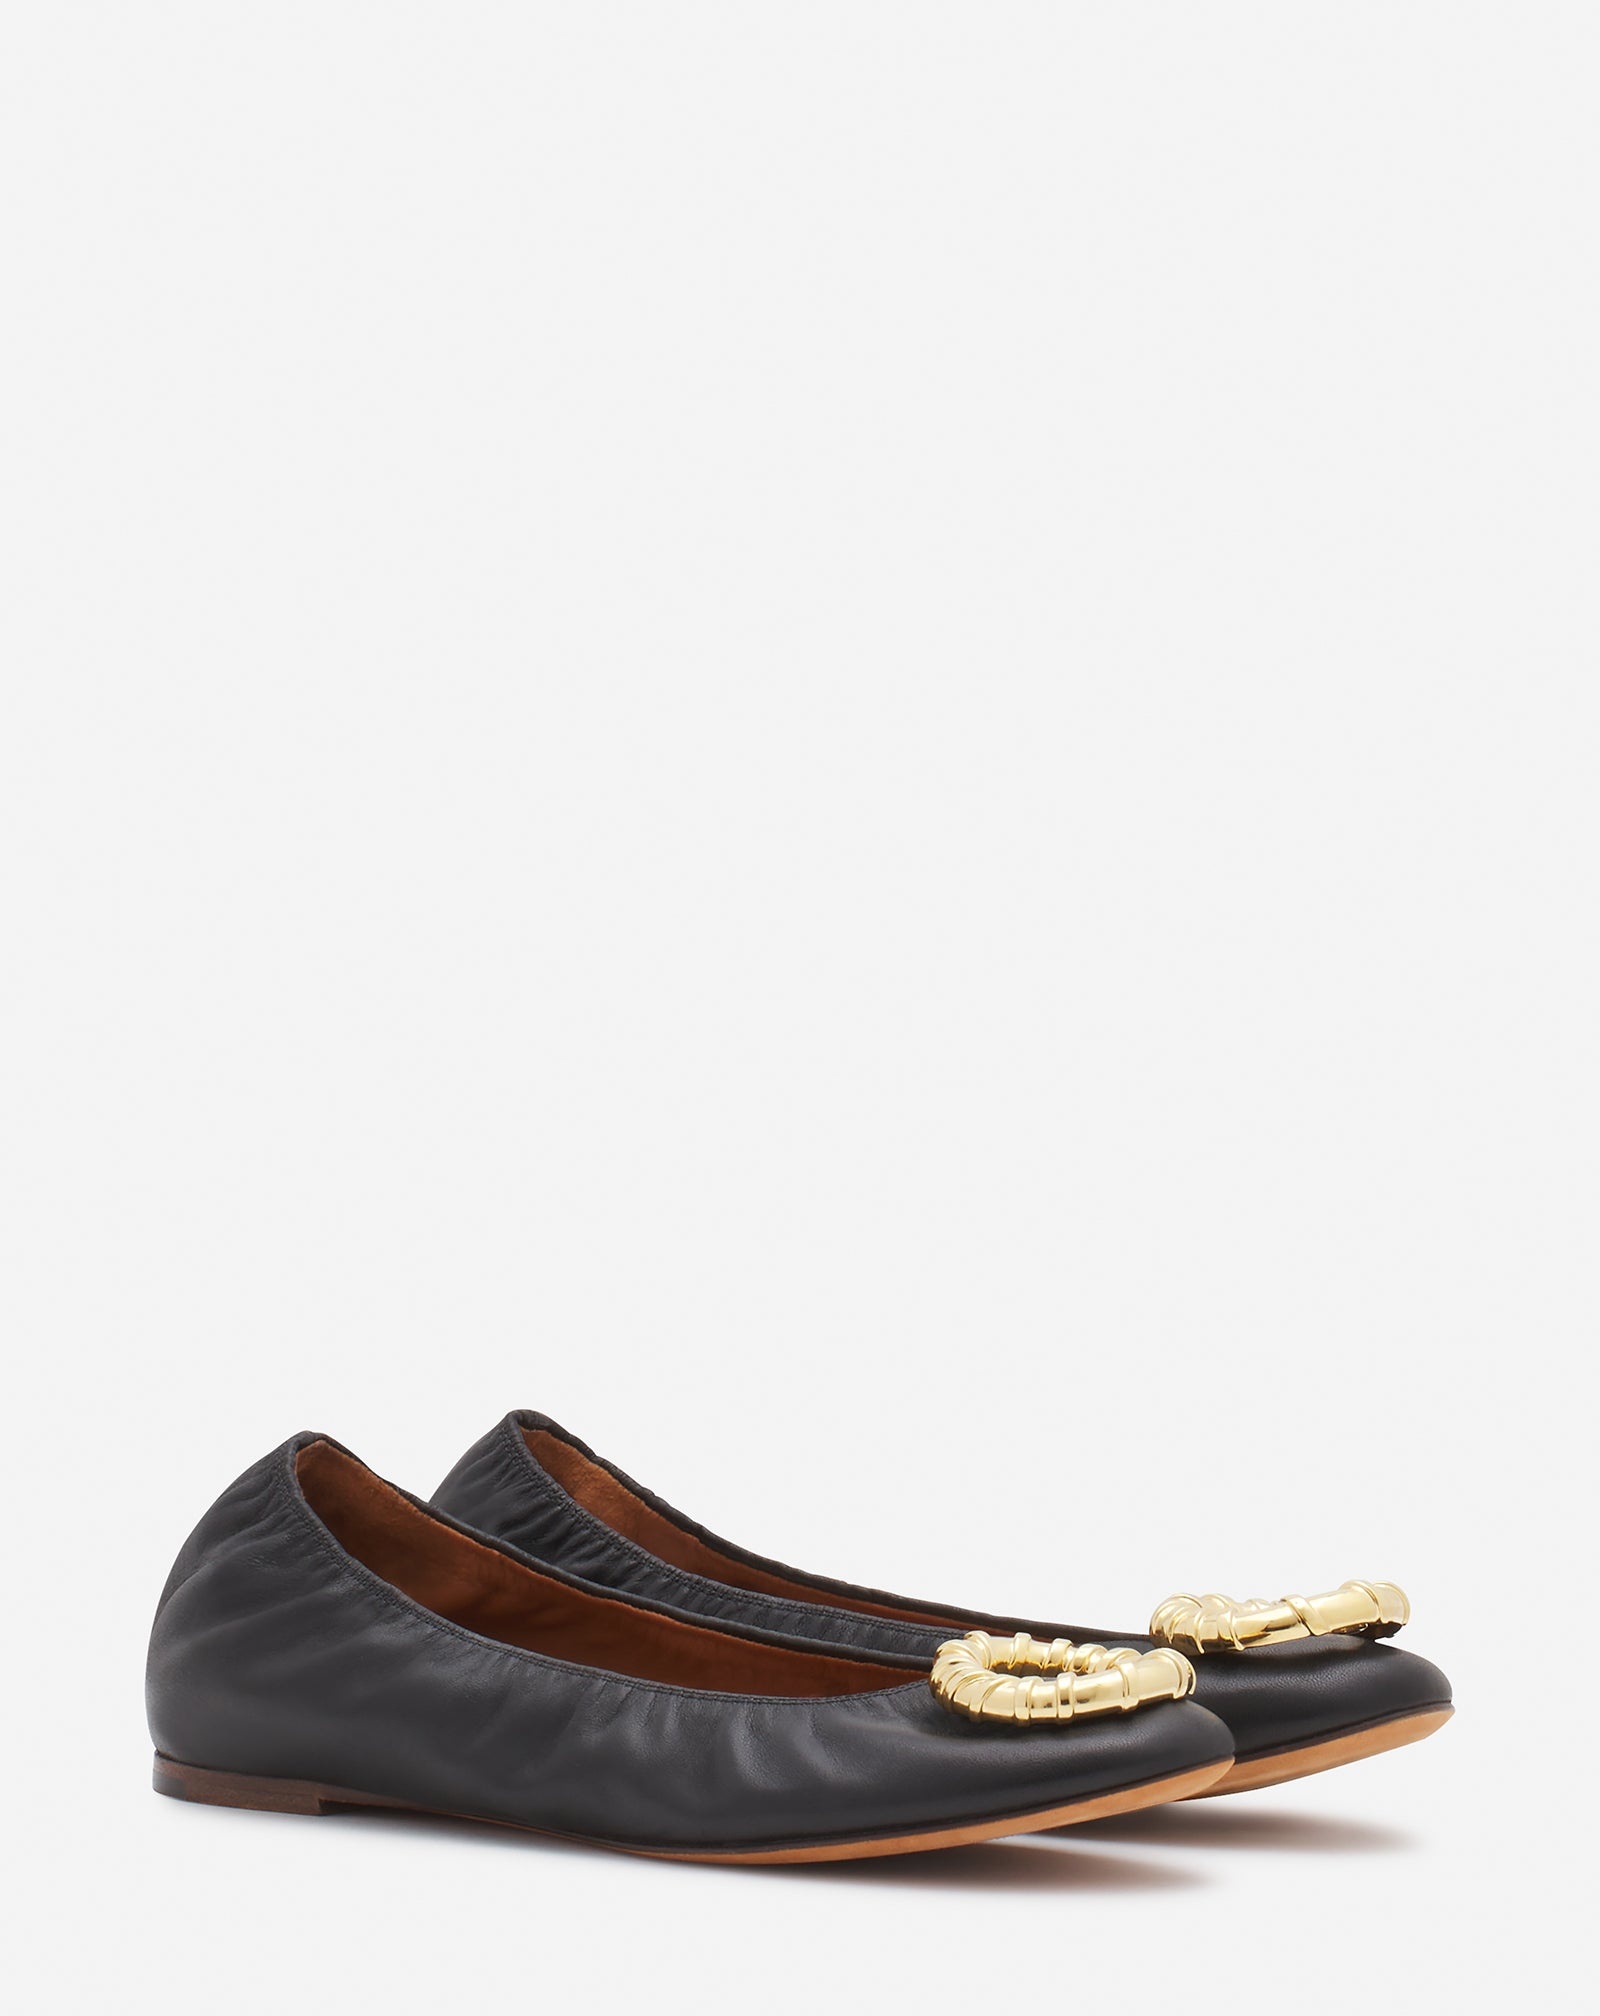 MELODIE LEATHER BALLERINA FLAT - 2